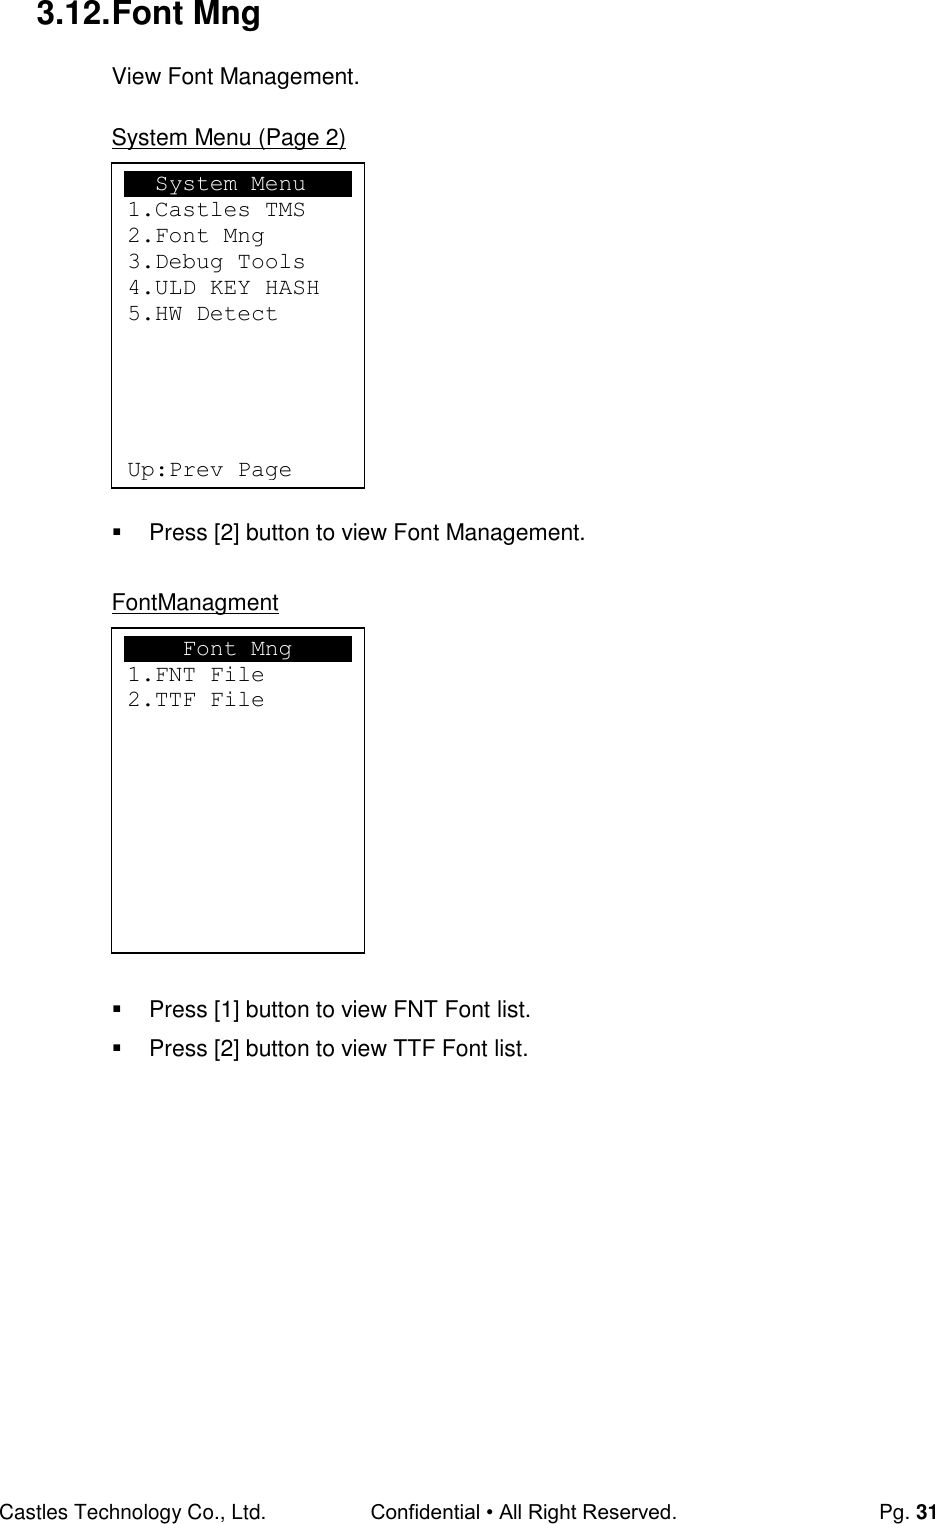 Castles Technology Co., Ltd. Confidential • All Right Reserved.  Pg. 31 3.12. Font Mng View Font Management.  System Menu (Page 2)            Press [2] button to view Font Management.  FontManagment             Press [1] button to view FNT Font list.   Press [2] button to view TTF Font list.                 Font Mng 1.FNT File 2.TTF File   System Menu 1.Castles TMS 2.Font Mng 3.Debug Tools 4.ULD KEY HASH 5.HW Detect      Up:Prev Page  